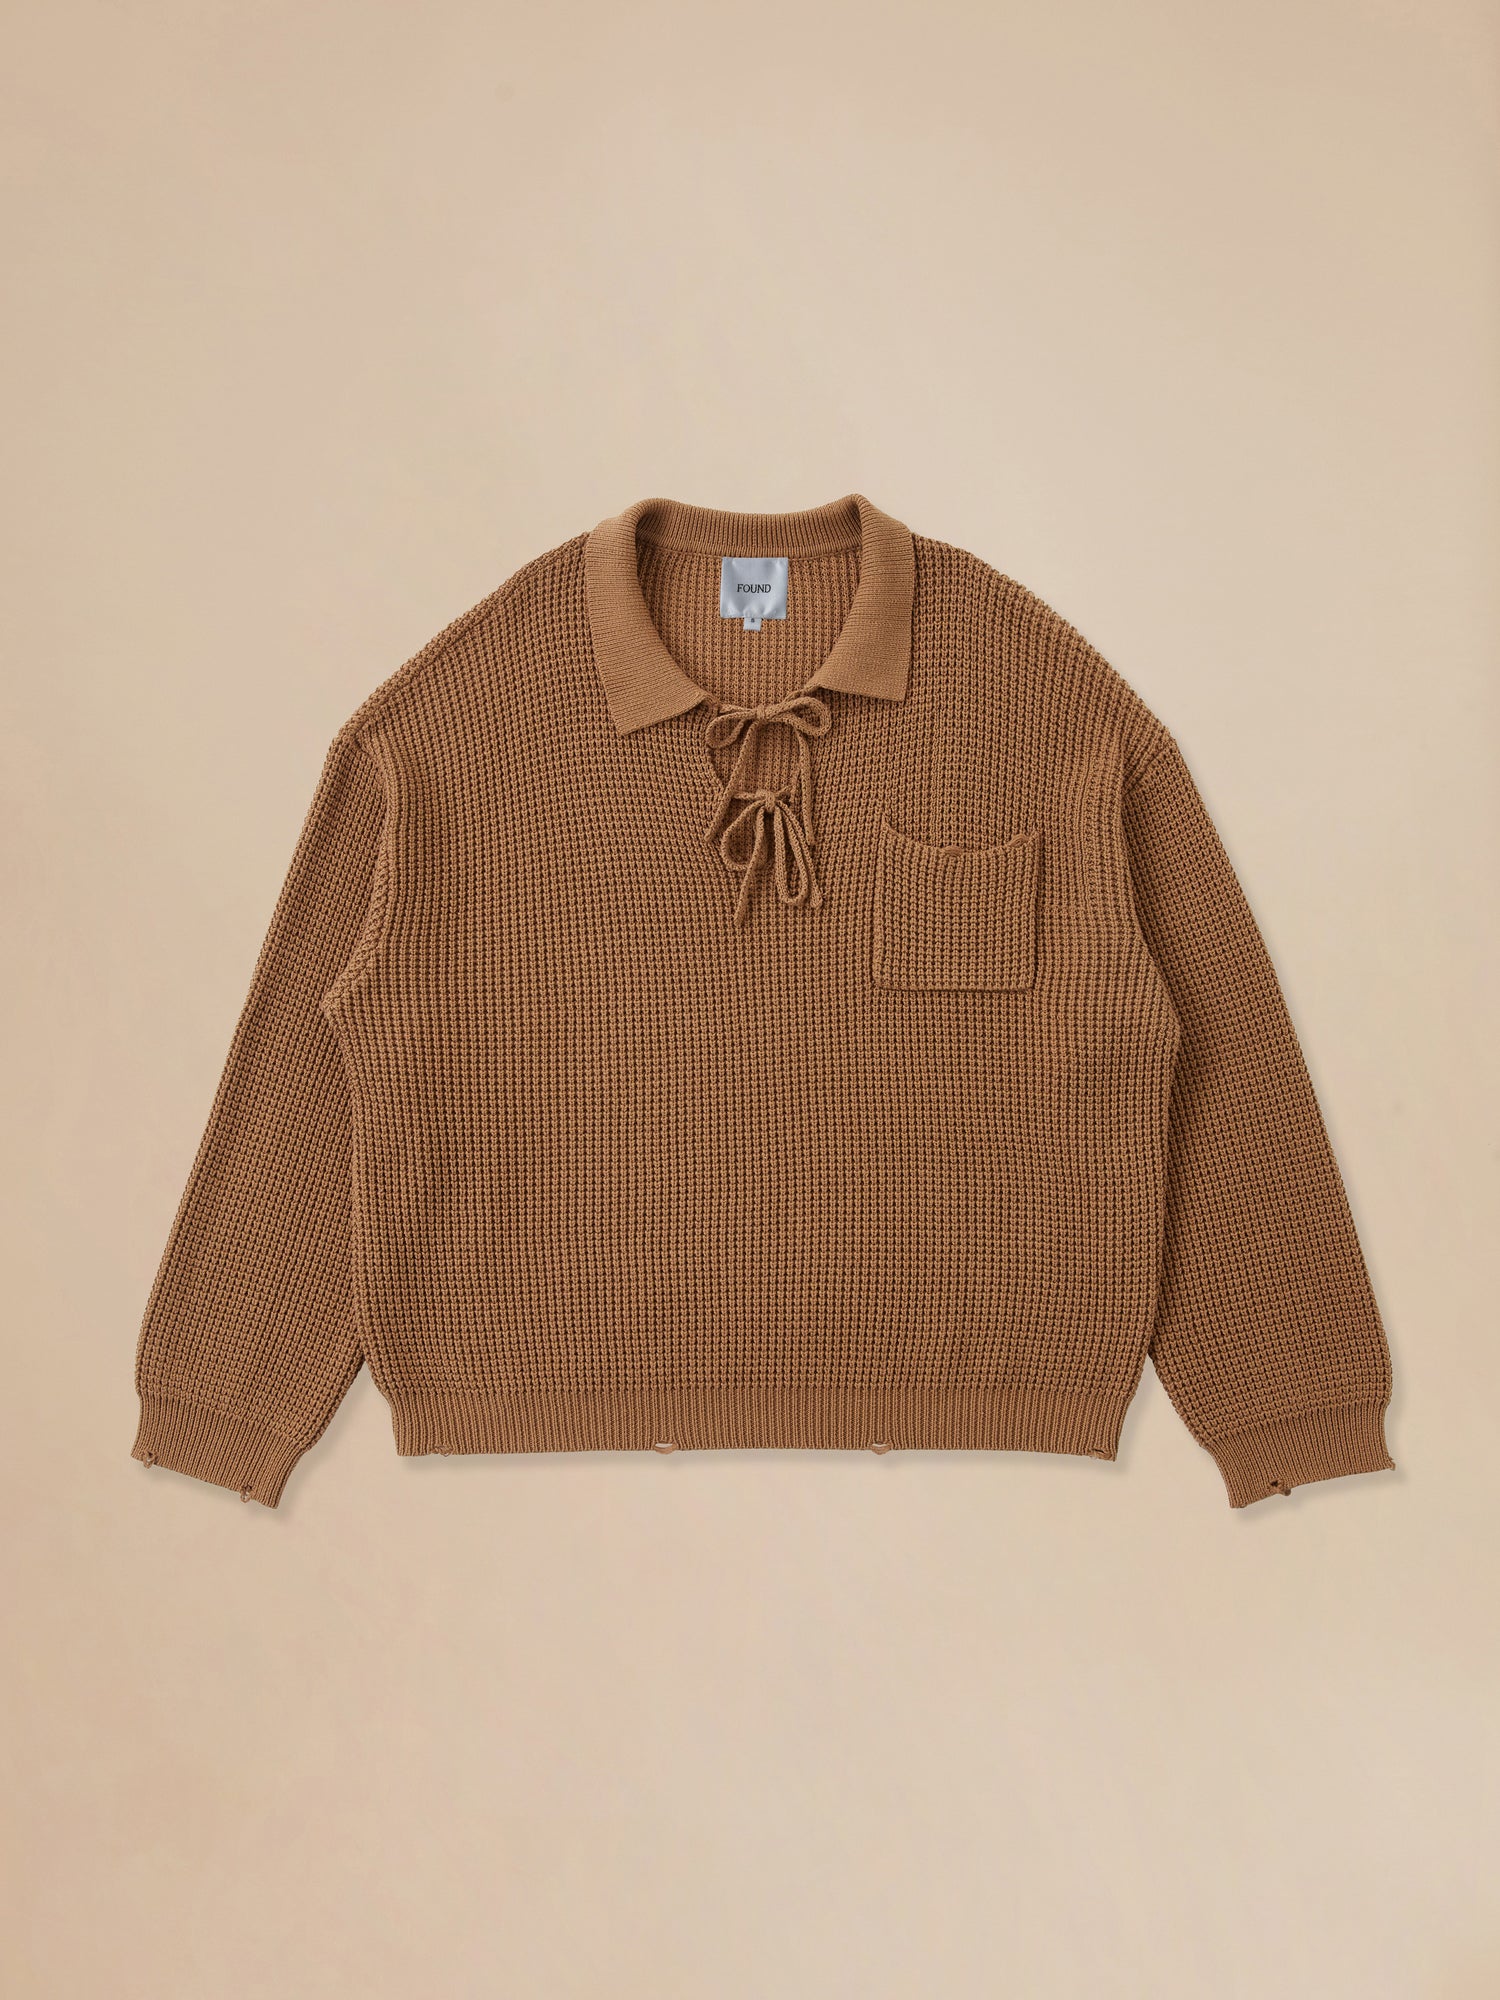 A cozy Found Tie-Collar Knit Sweater with a pocket on it.